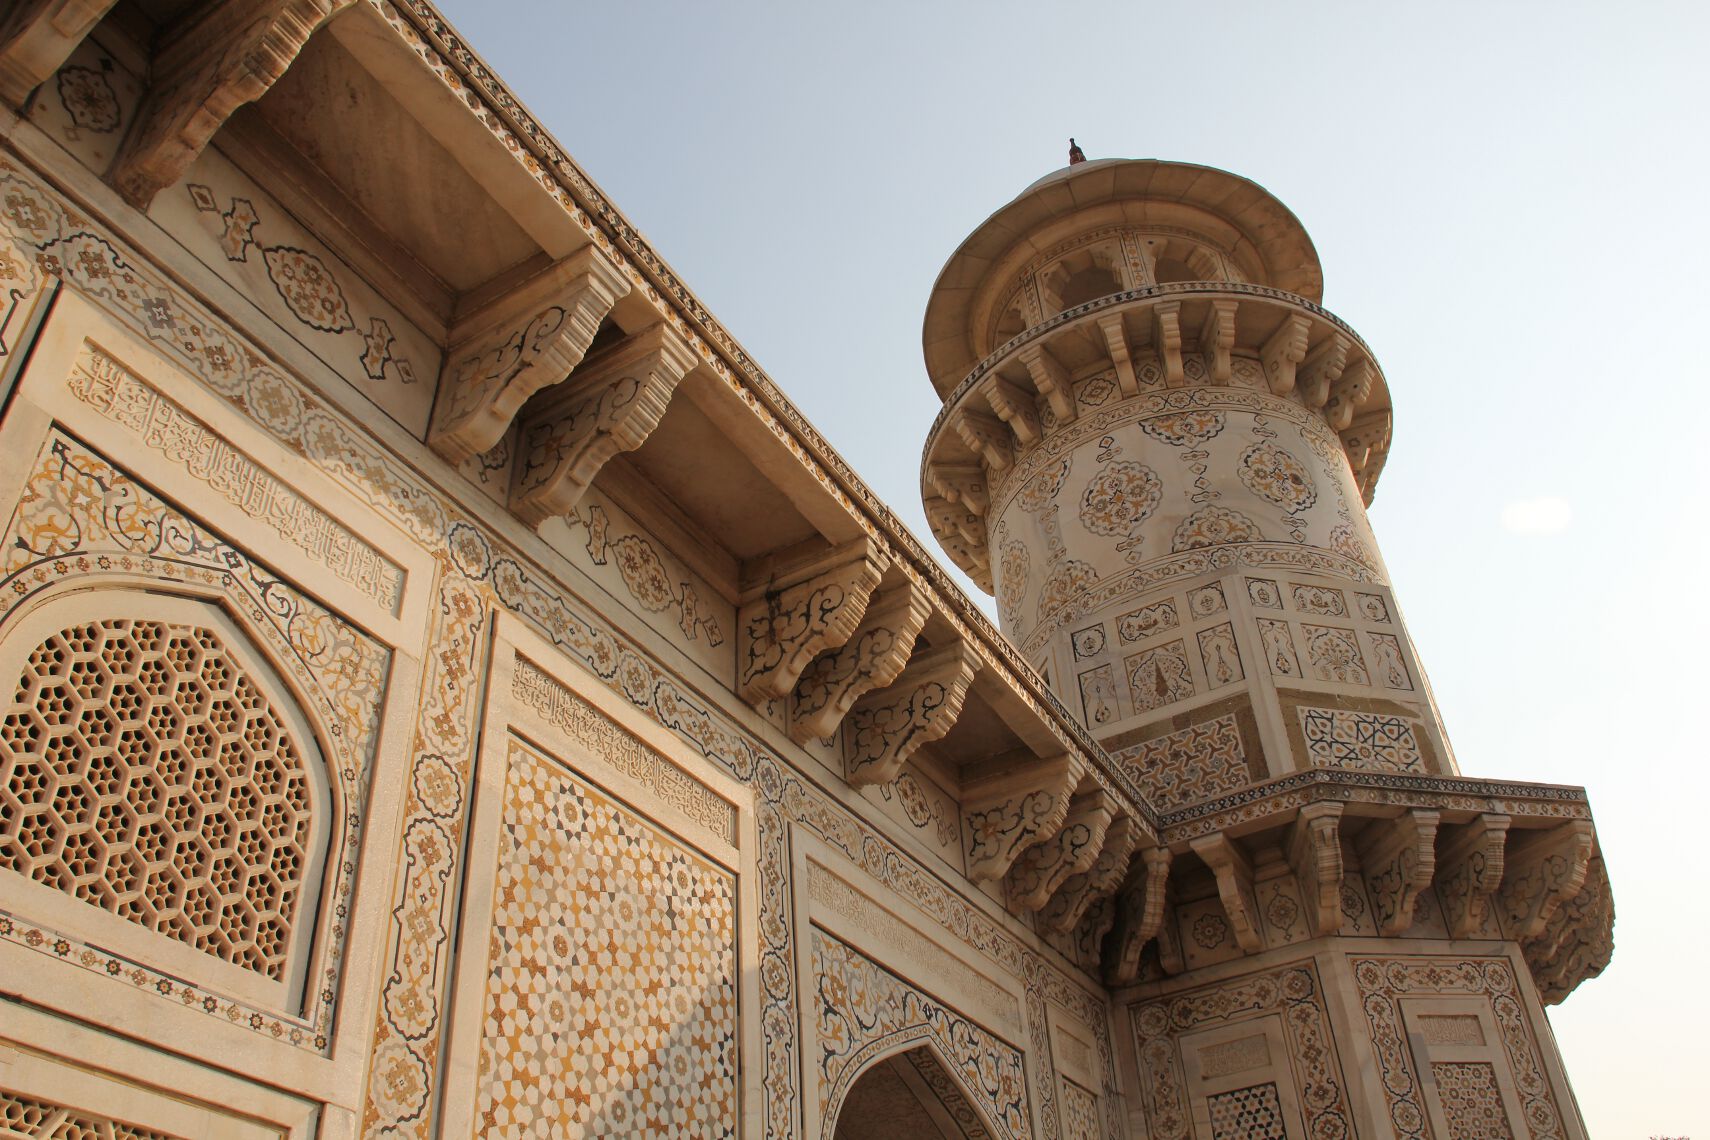 The Itimad-Ud-Daulah, known as the exquisite "Baby Taj," has delicately carved marble lattice screens rivaling some of the Taj's artistry.